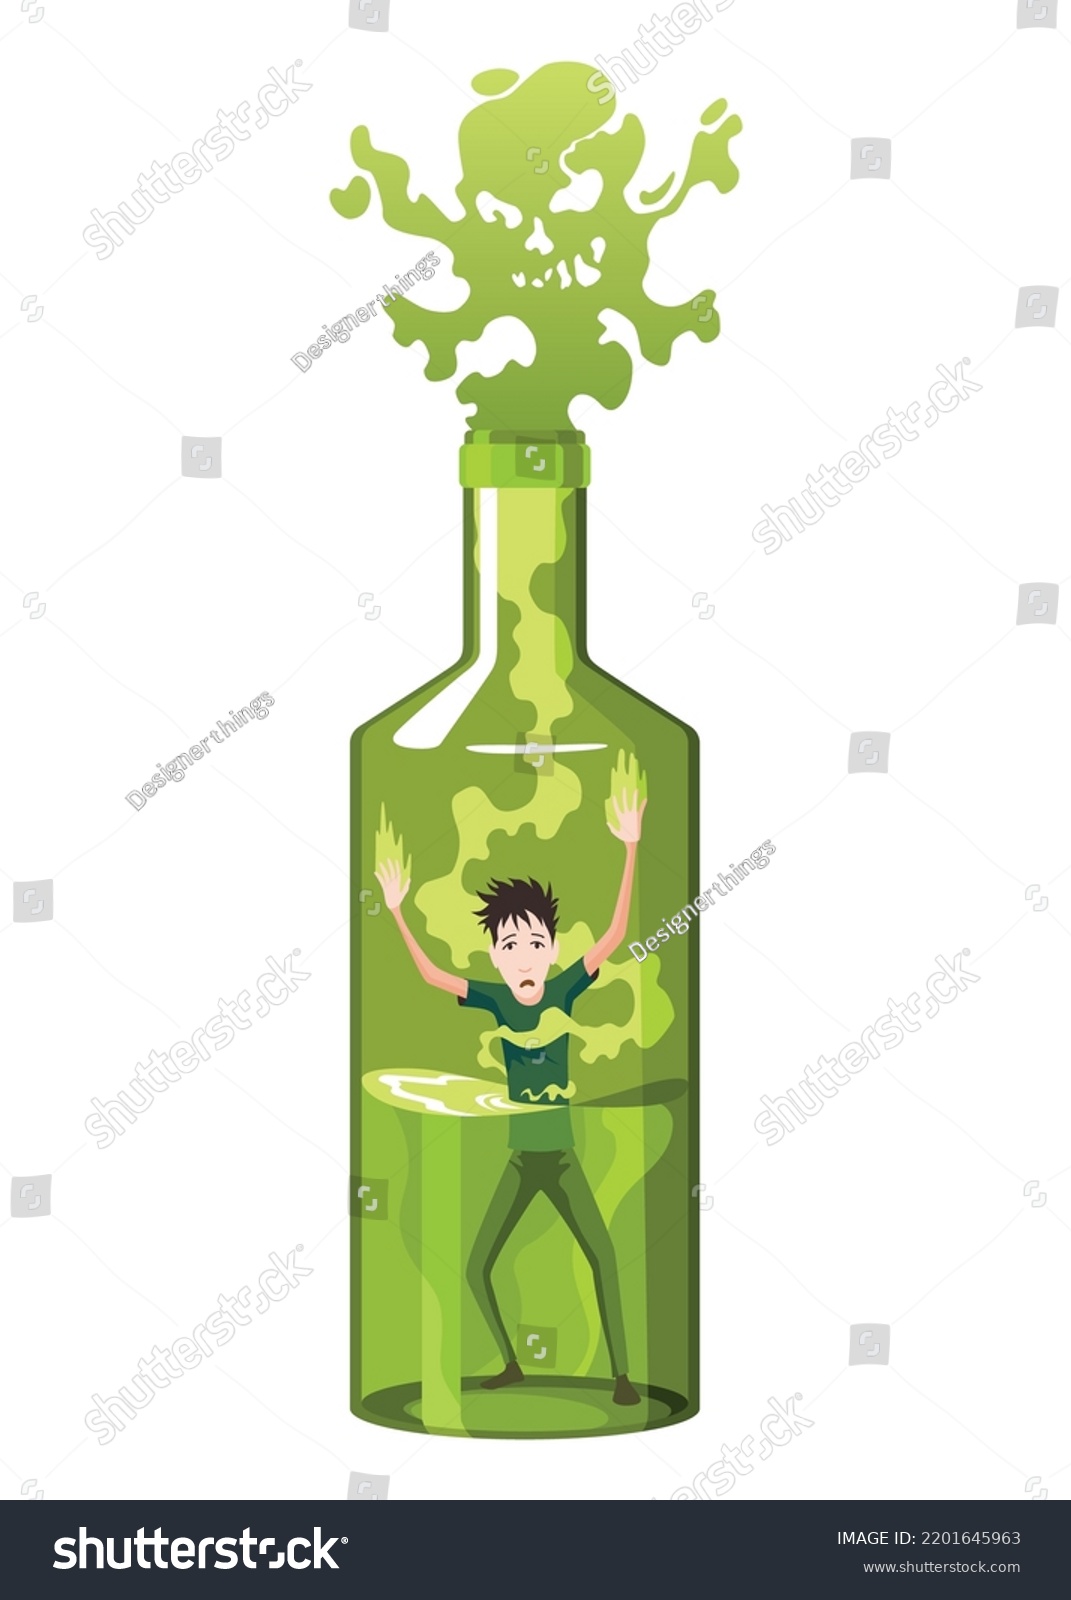 SVG of Alcoholic or boozer. Unhappy man standing in green bottle. Young guy with alcohol addiction. Alcoholism concept problem, dependence, bad habit svg